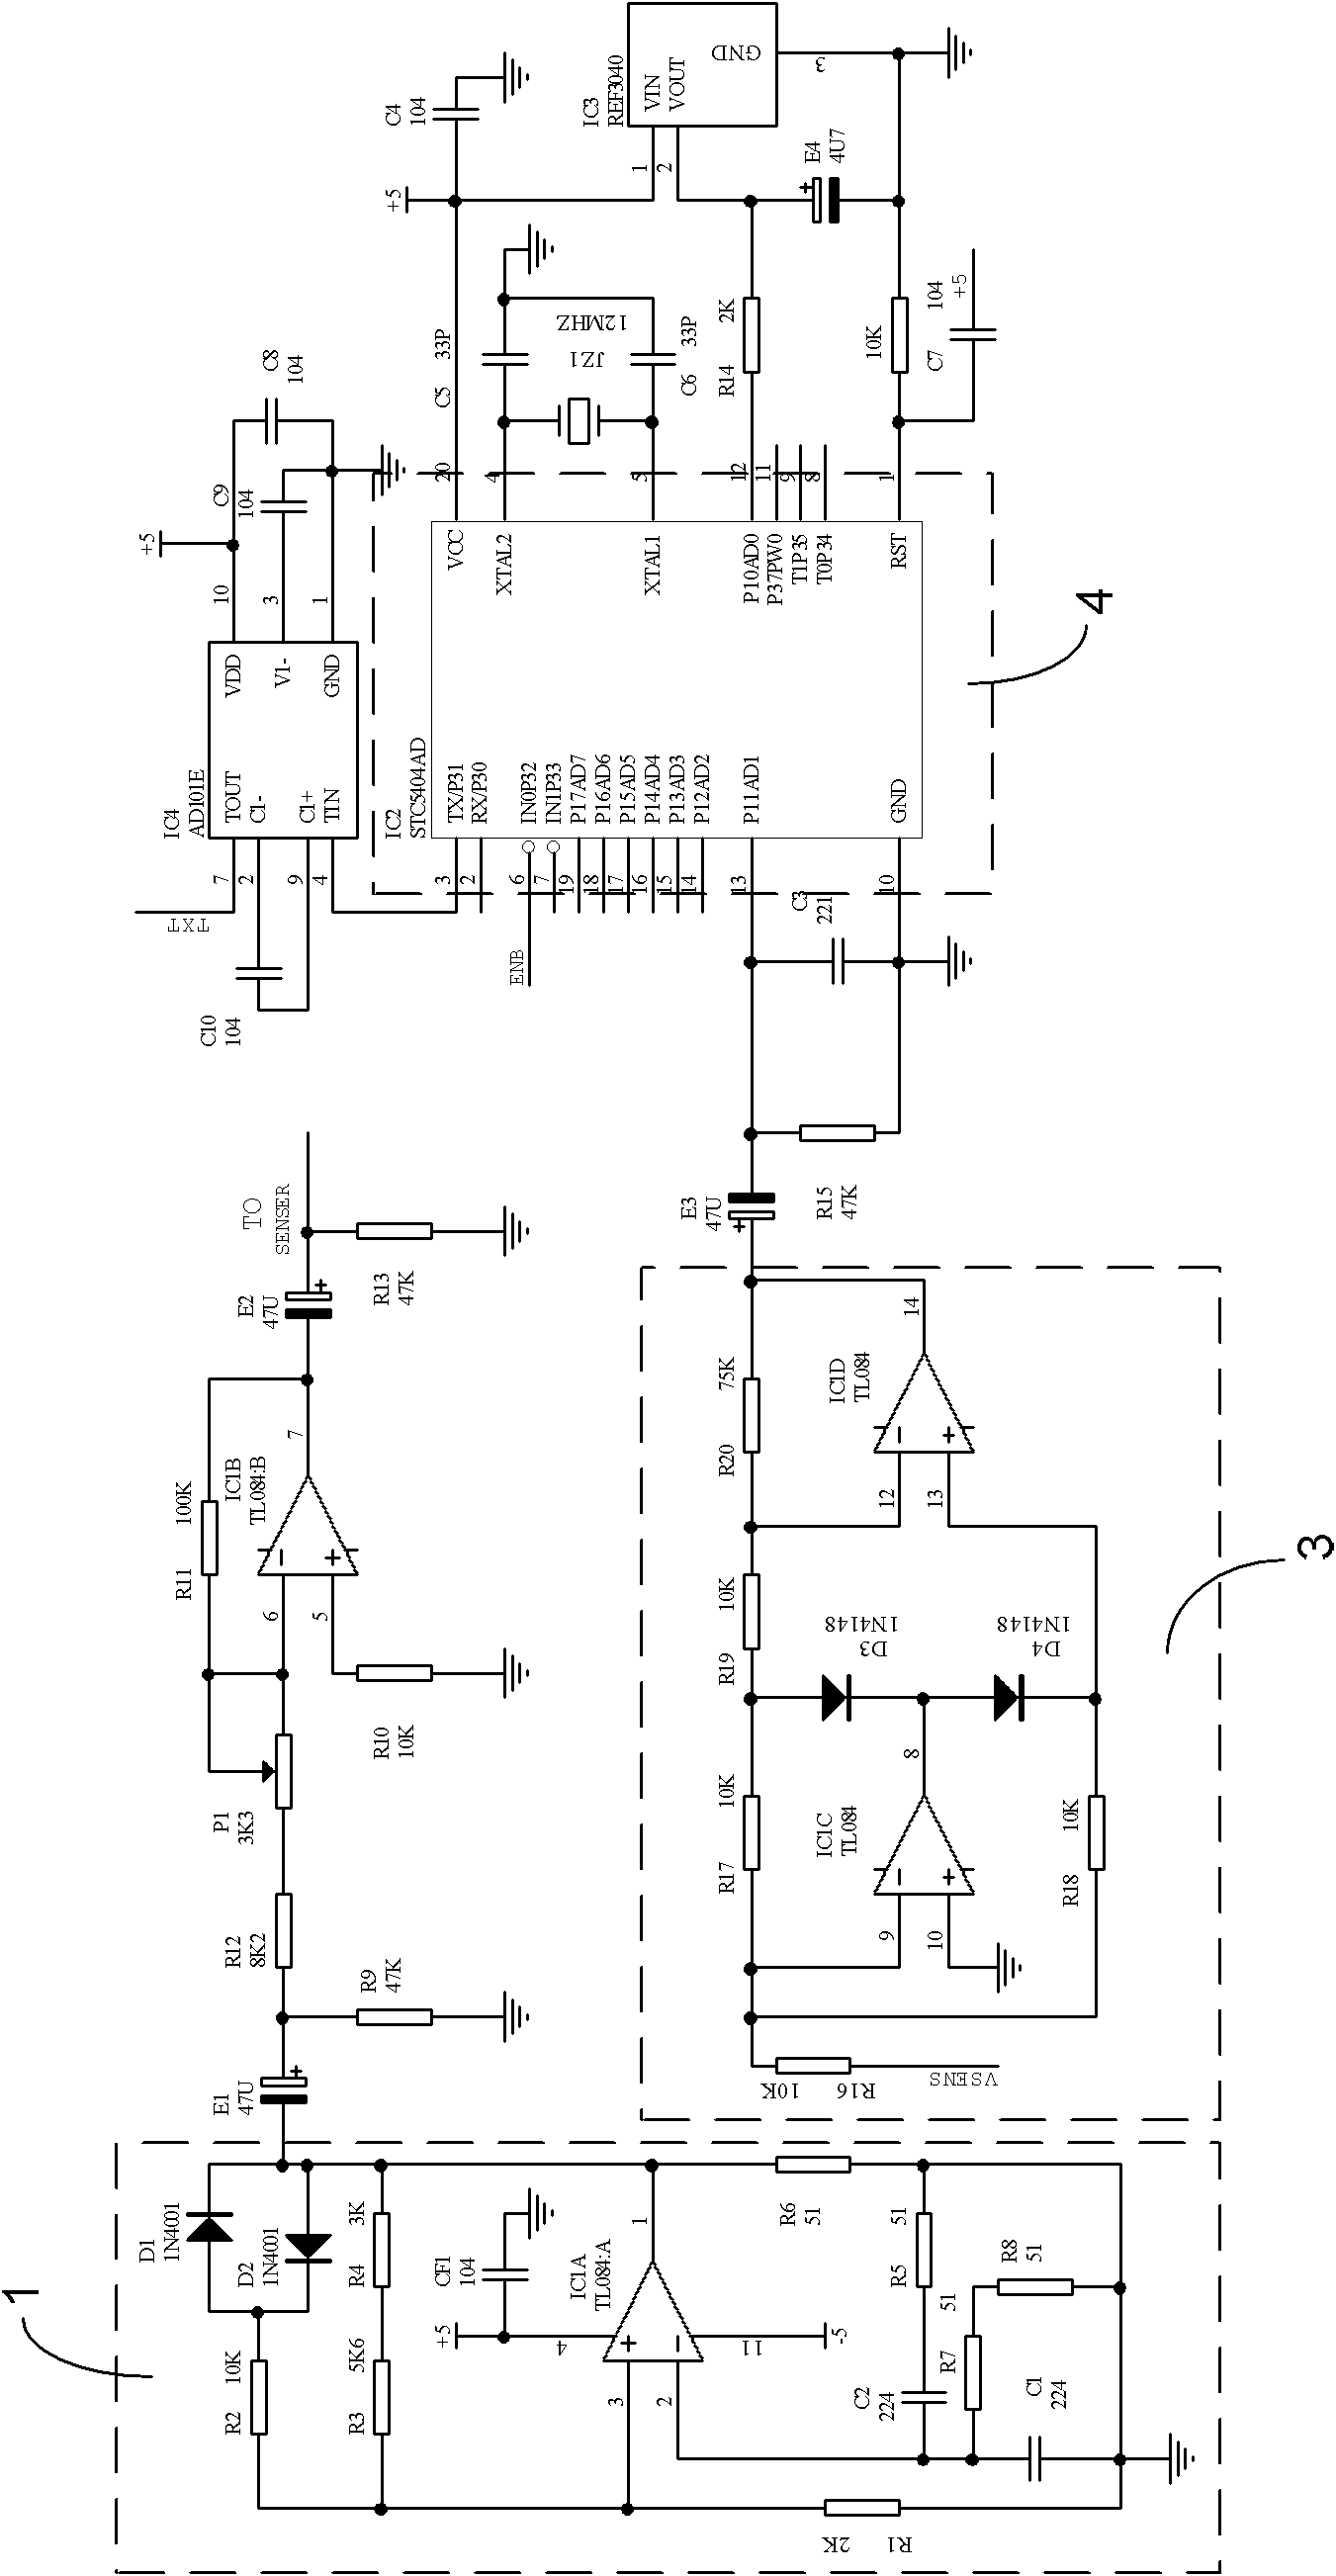 Integrated linear variable differential transformer (LVDT) displacement sensor for measuring micro strain of pile foundation